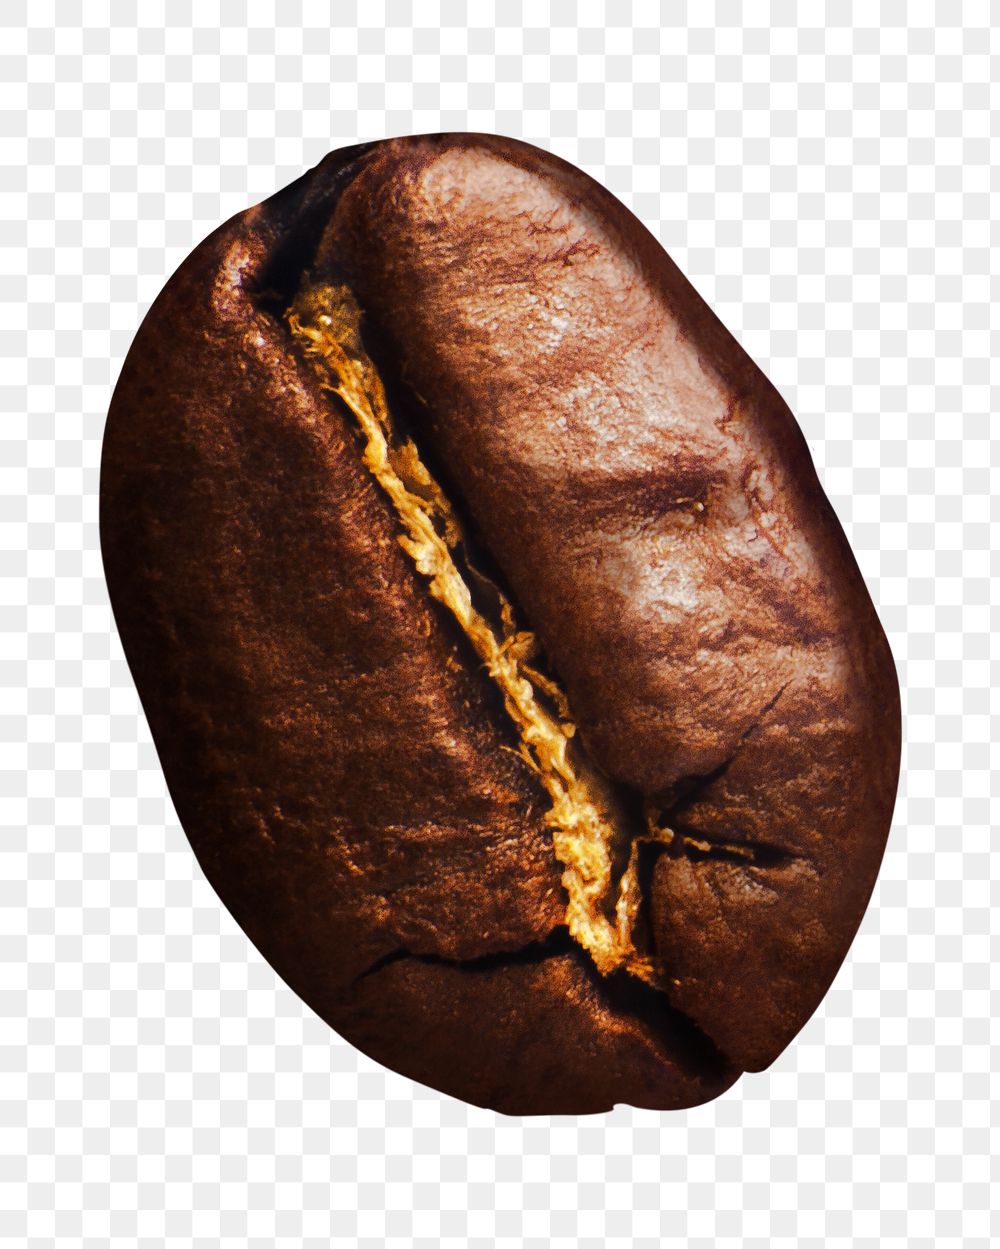 Coffee bean png sticker, transparent background